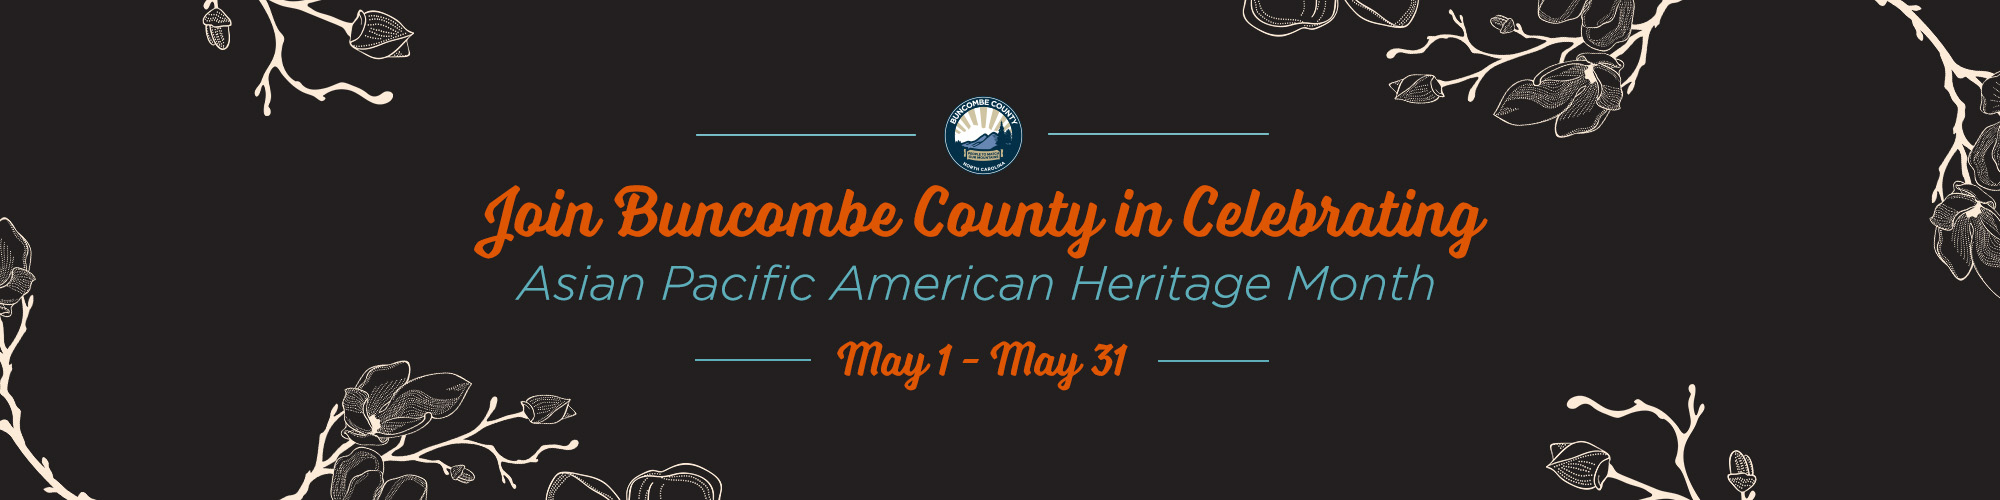 Join Buncombe County in Celebrating Asian Pacific American Heritage Month